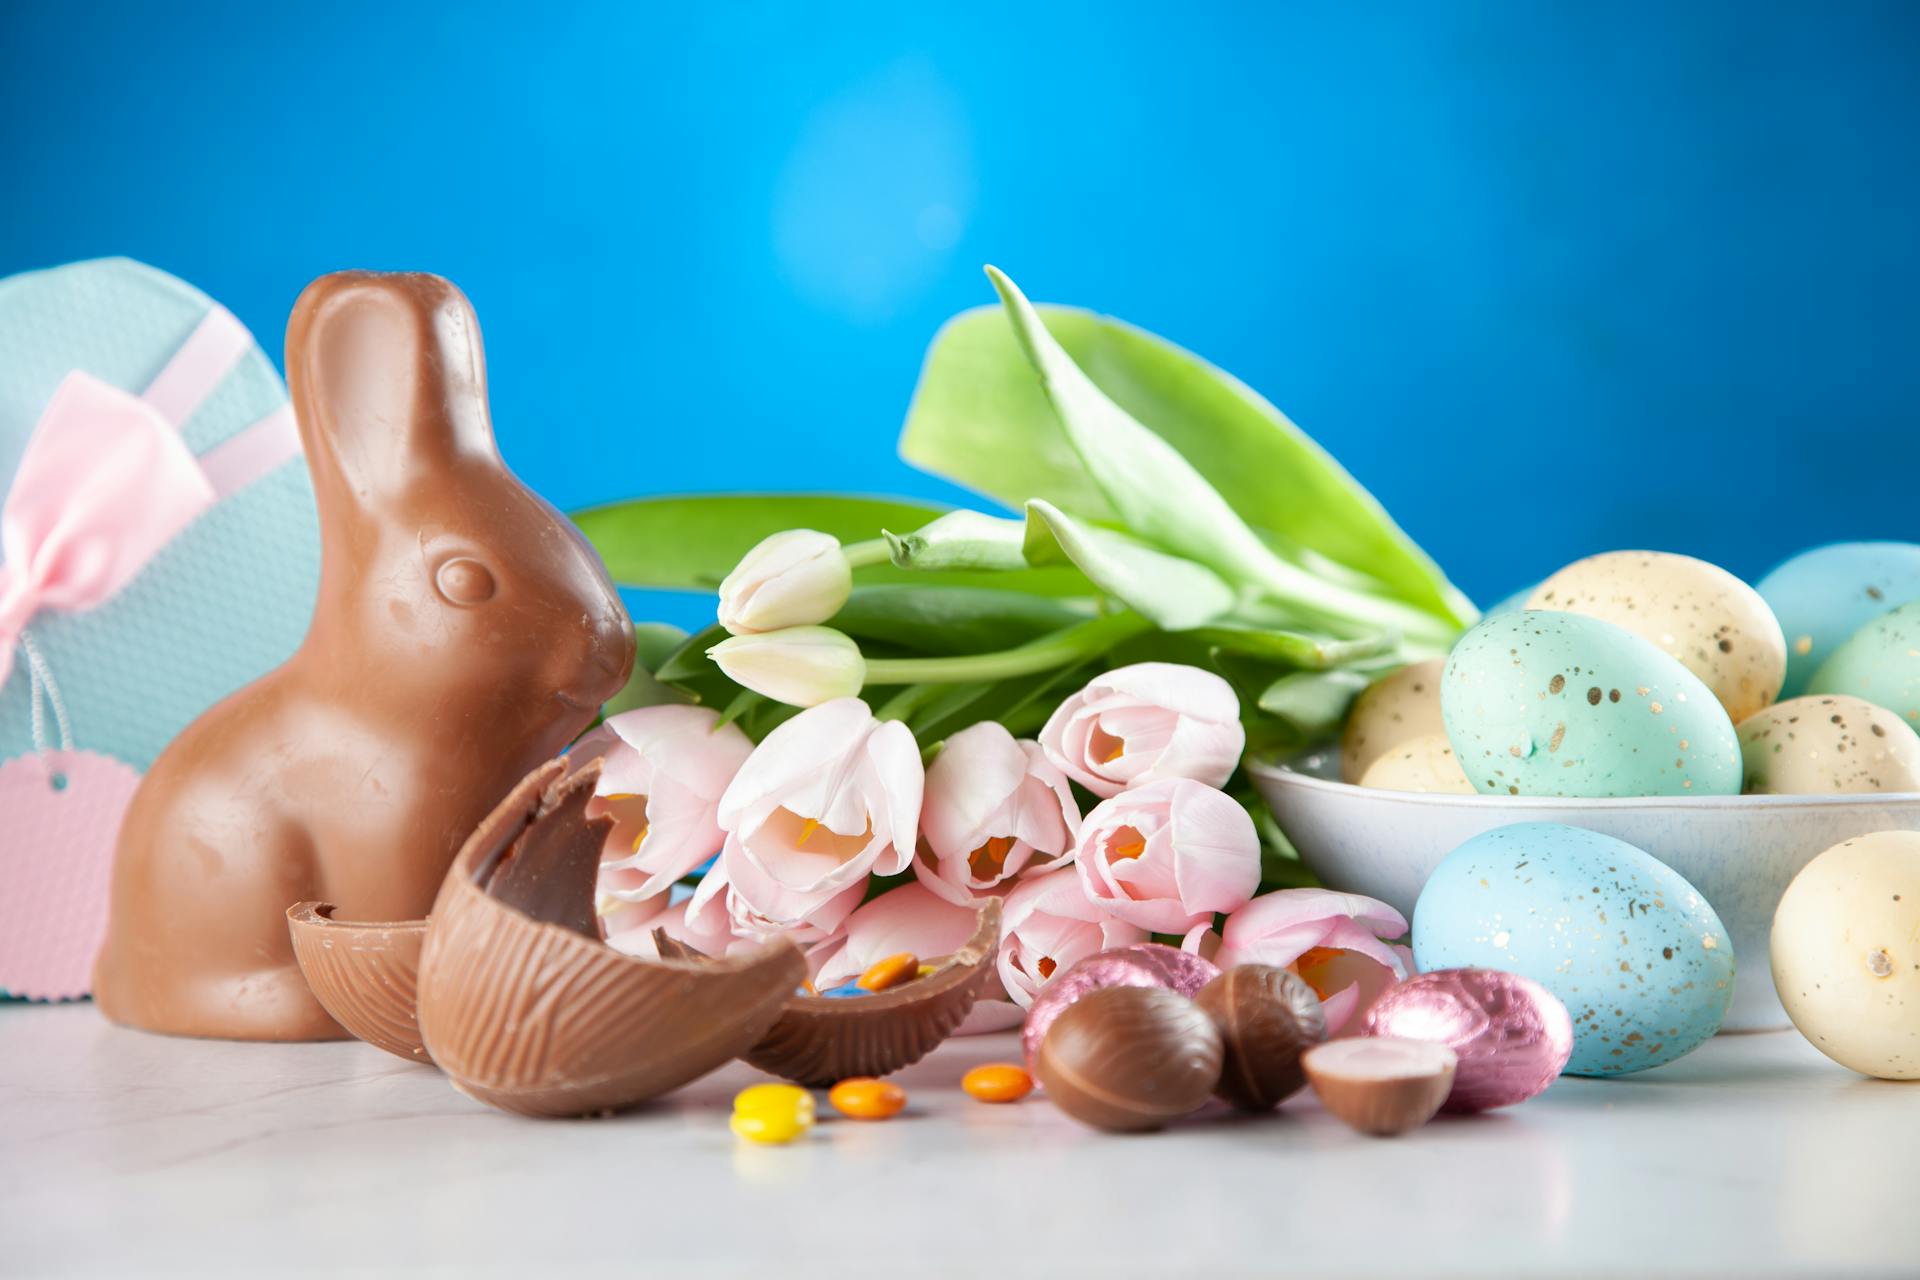 Elevate your chocolate sales this Easter through personalised packaging